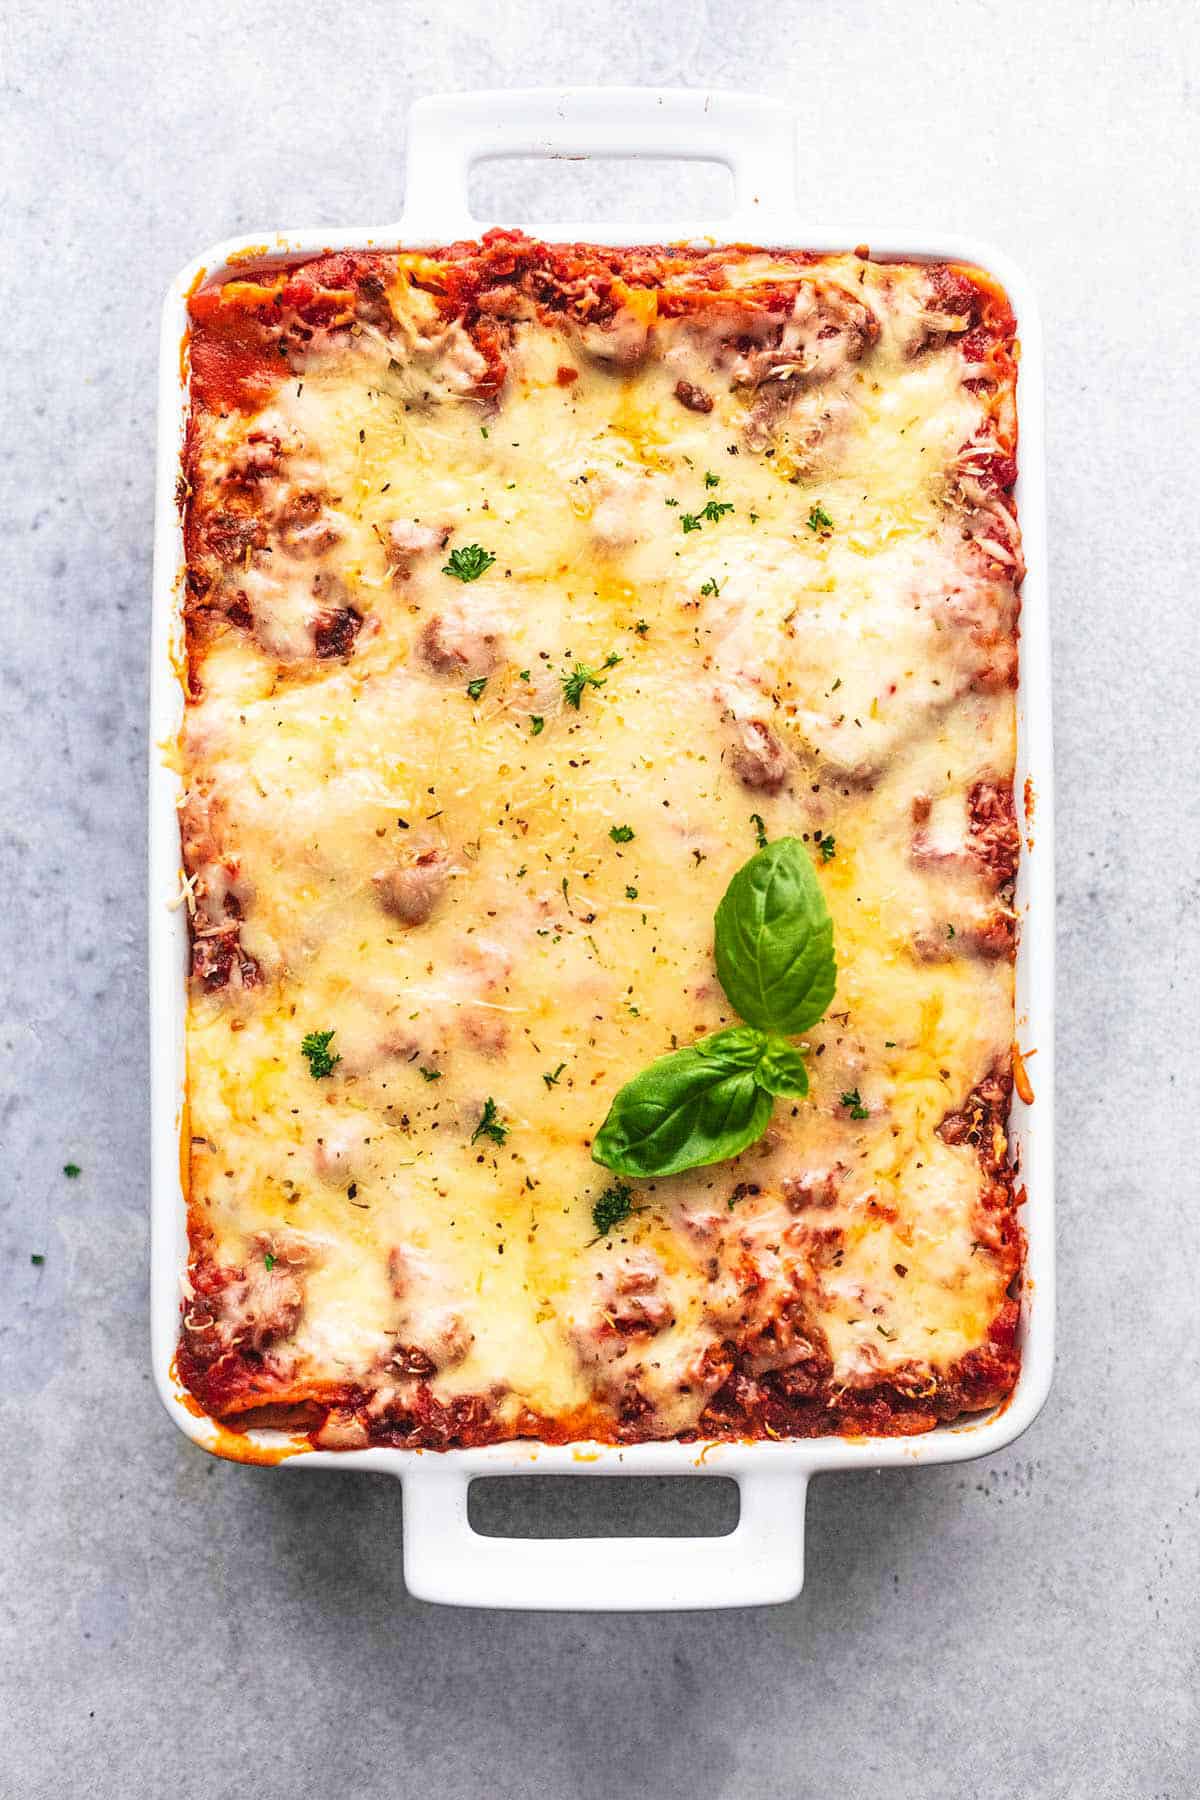 pan of lasagna on a gray background